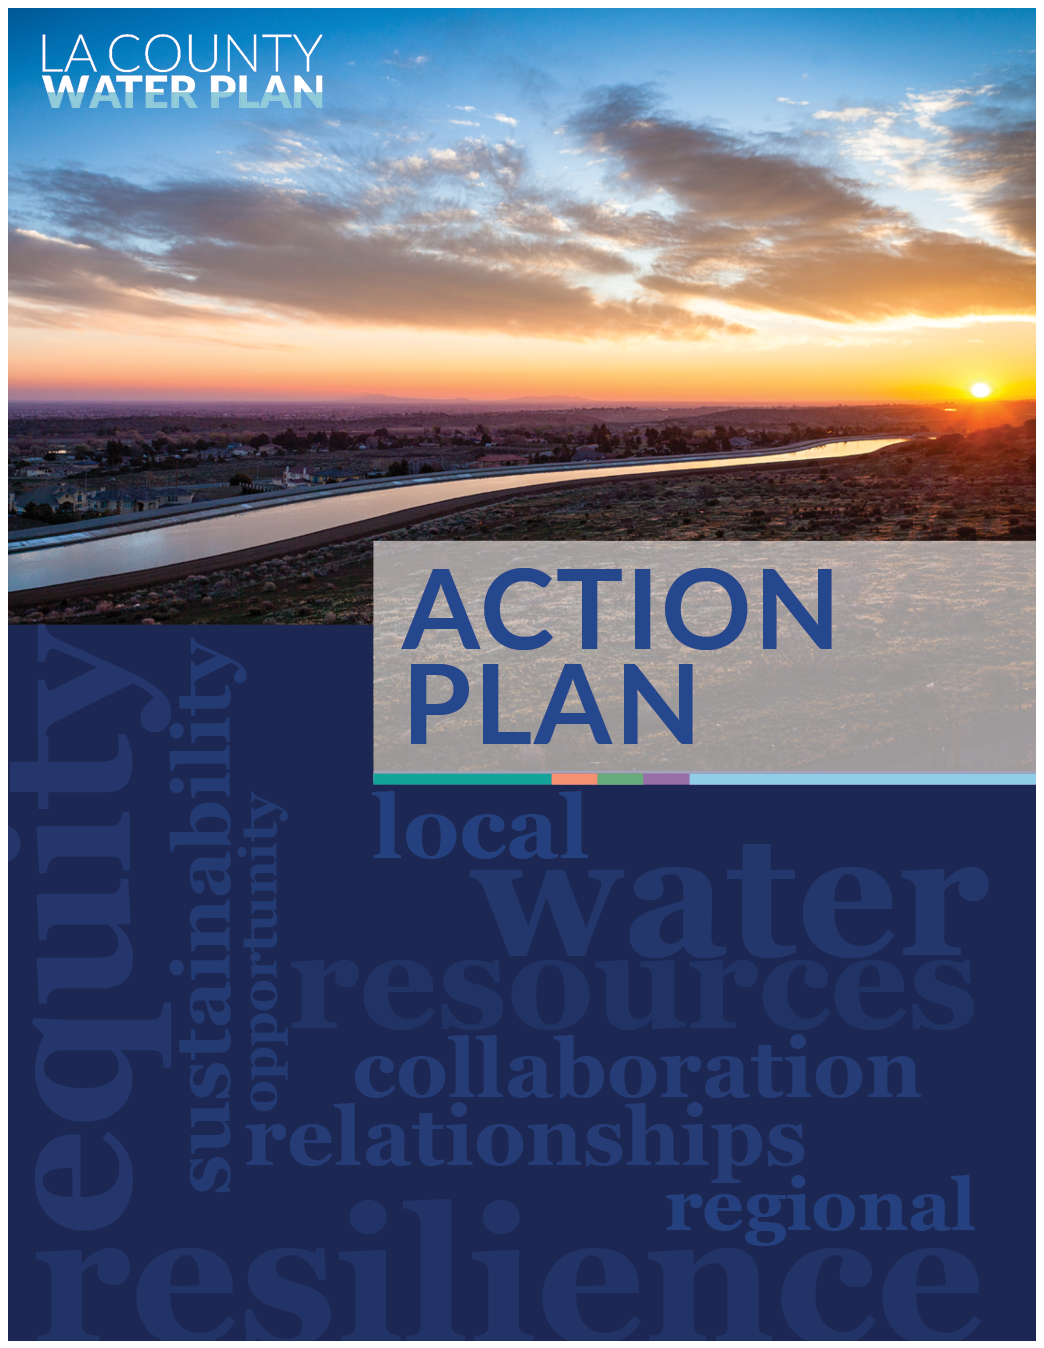 Thumbnail of the LA County Water Plan Action Plan.  The top half of the cover has a picture of a sunset a canal and the LA County Water Plan logo in the top left corner. The bottom half of the cover has words that describe the LA County Water Plan.   